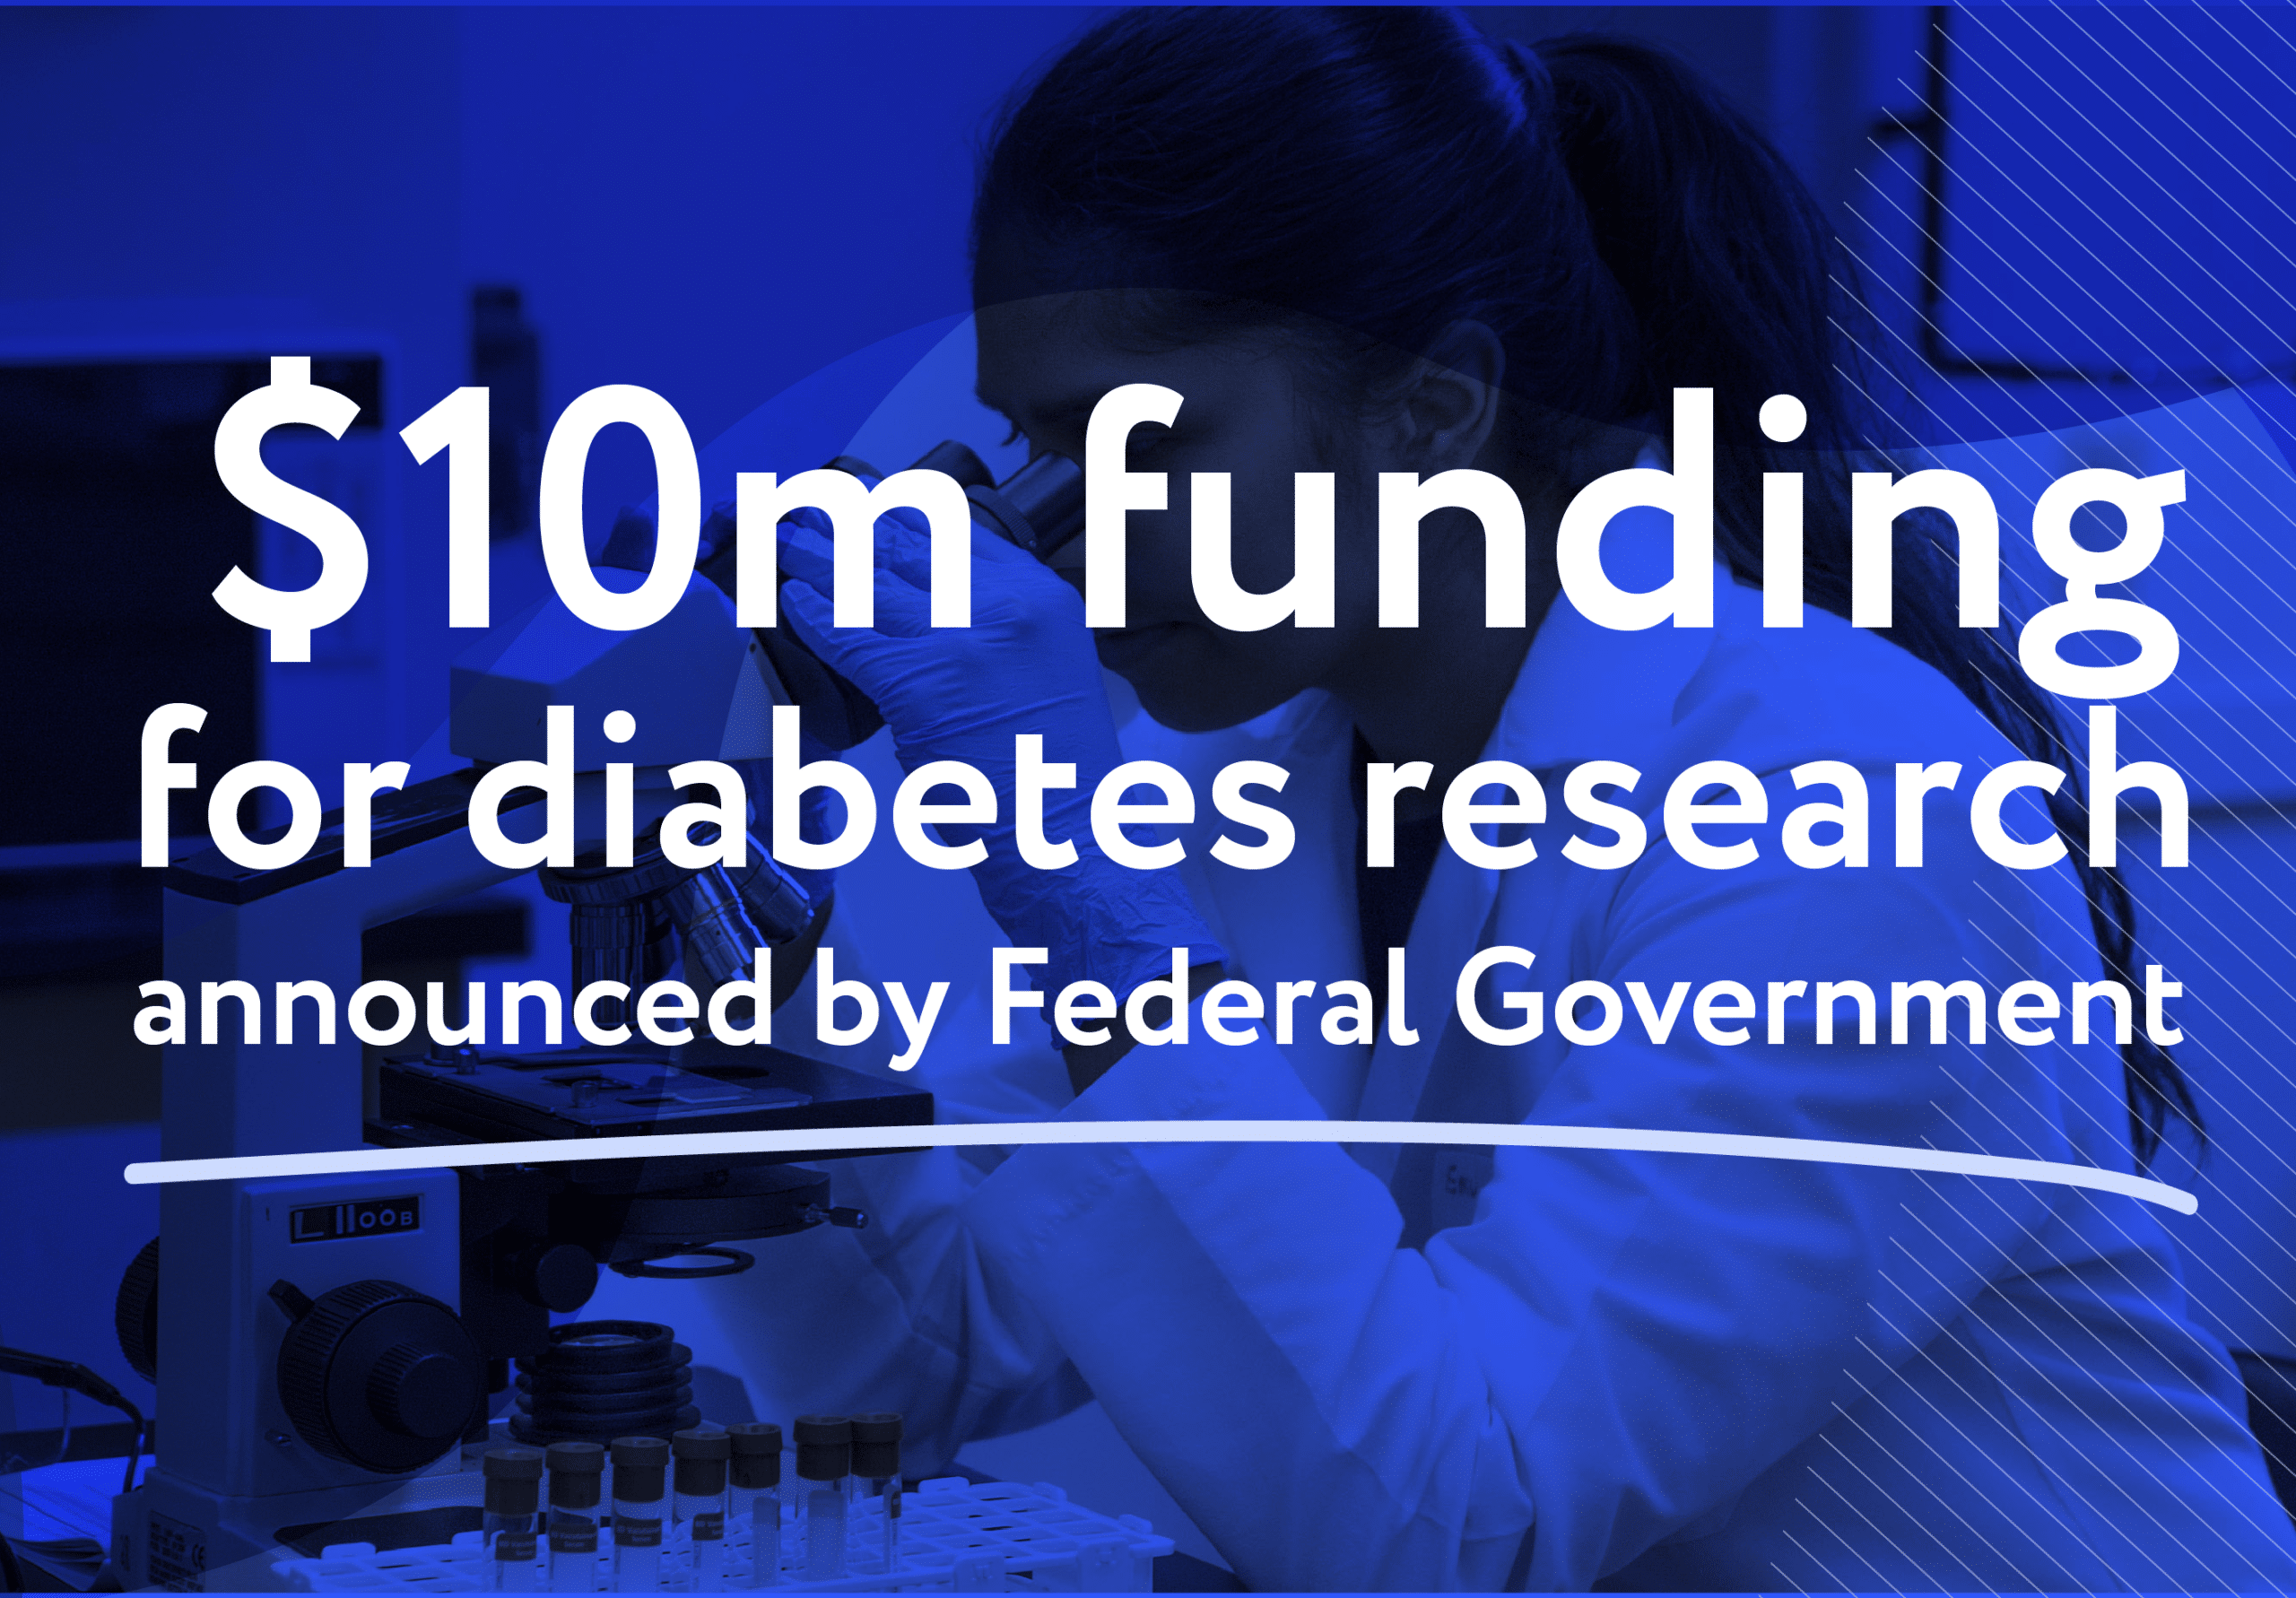 $10M worth of new funding for diabetes research announced by Federal Government